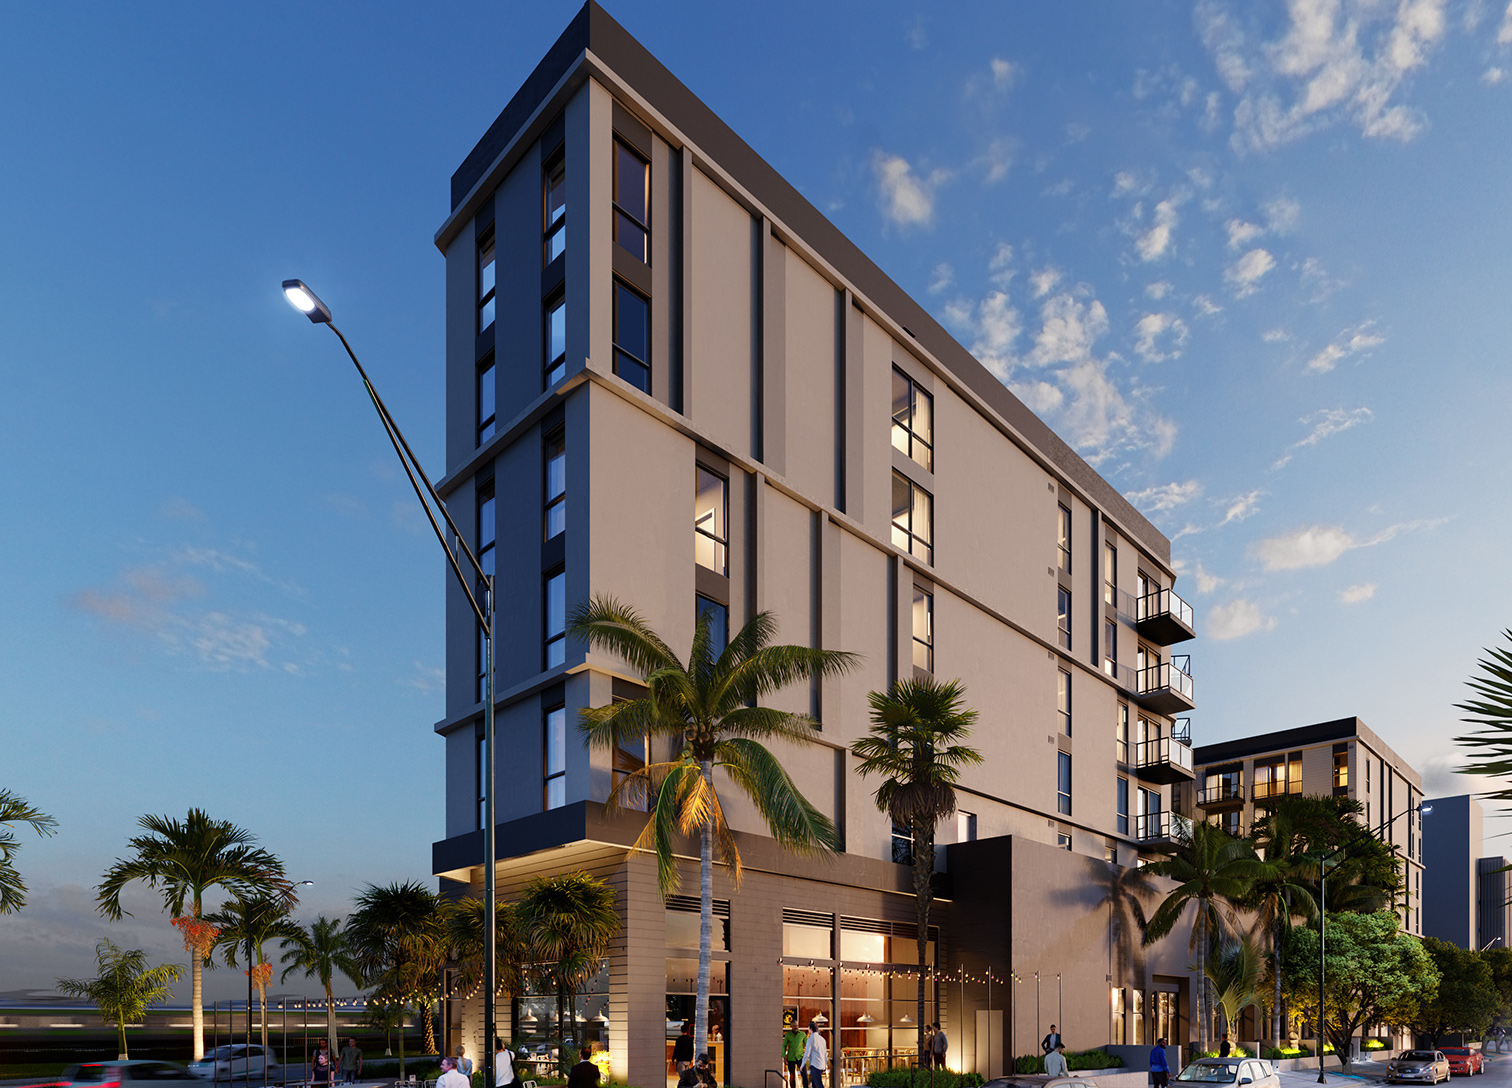 Walker & Dunlop Arranges $51 Million Loan for 136-Unit Mixed-Use Affordable Housing Community with Attached City Hall in Florida